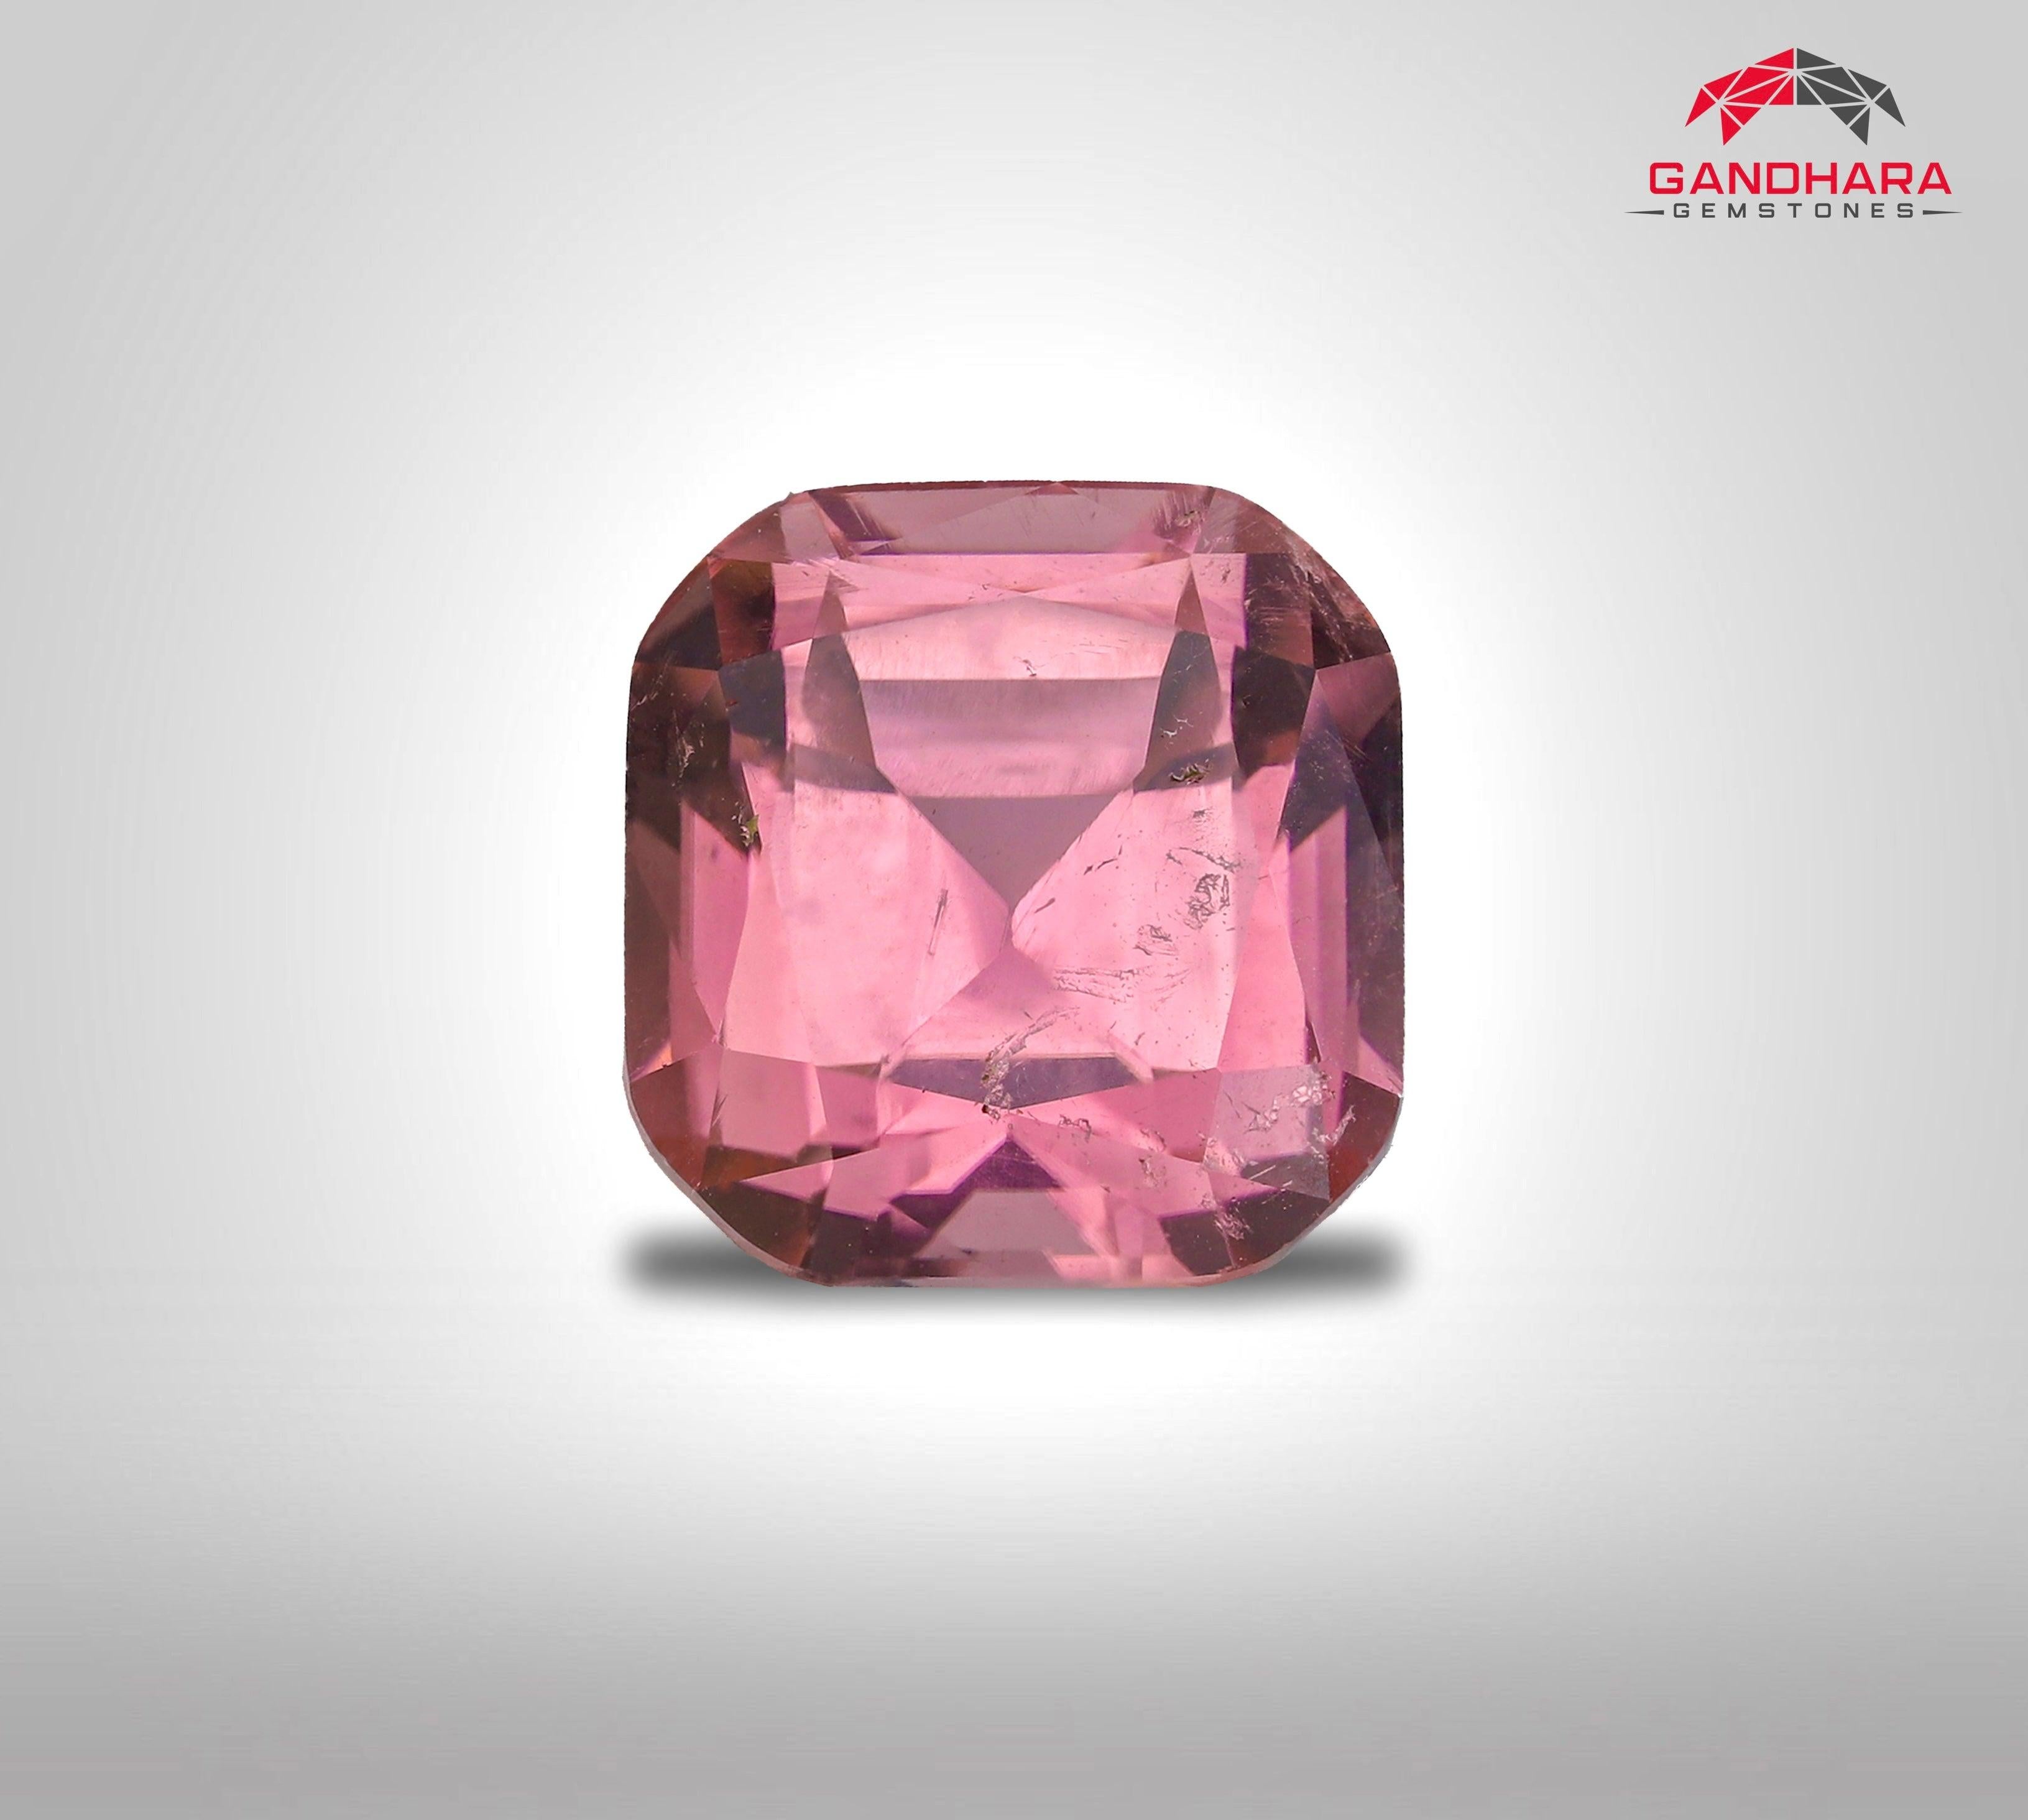 Sweet Pink Natural Tourmaline, available for sale at wholesale price, natural high-quality, 3.62 carats Loose certified Pink tourmaline gemstone from Congo.

Product Information:
GEMSTONE TYPE	Sweet Pink Natural Tourmaline
WEIGHT	3.62